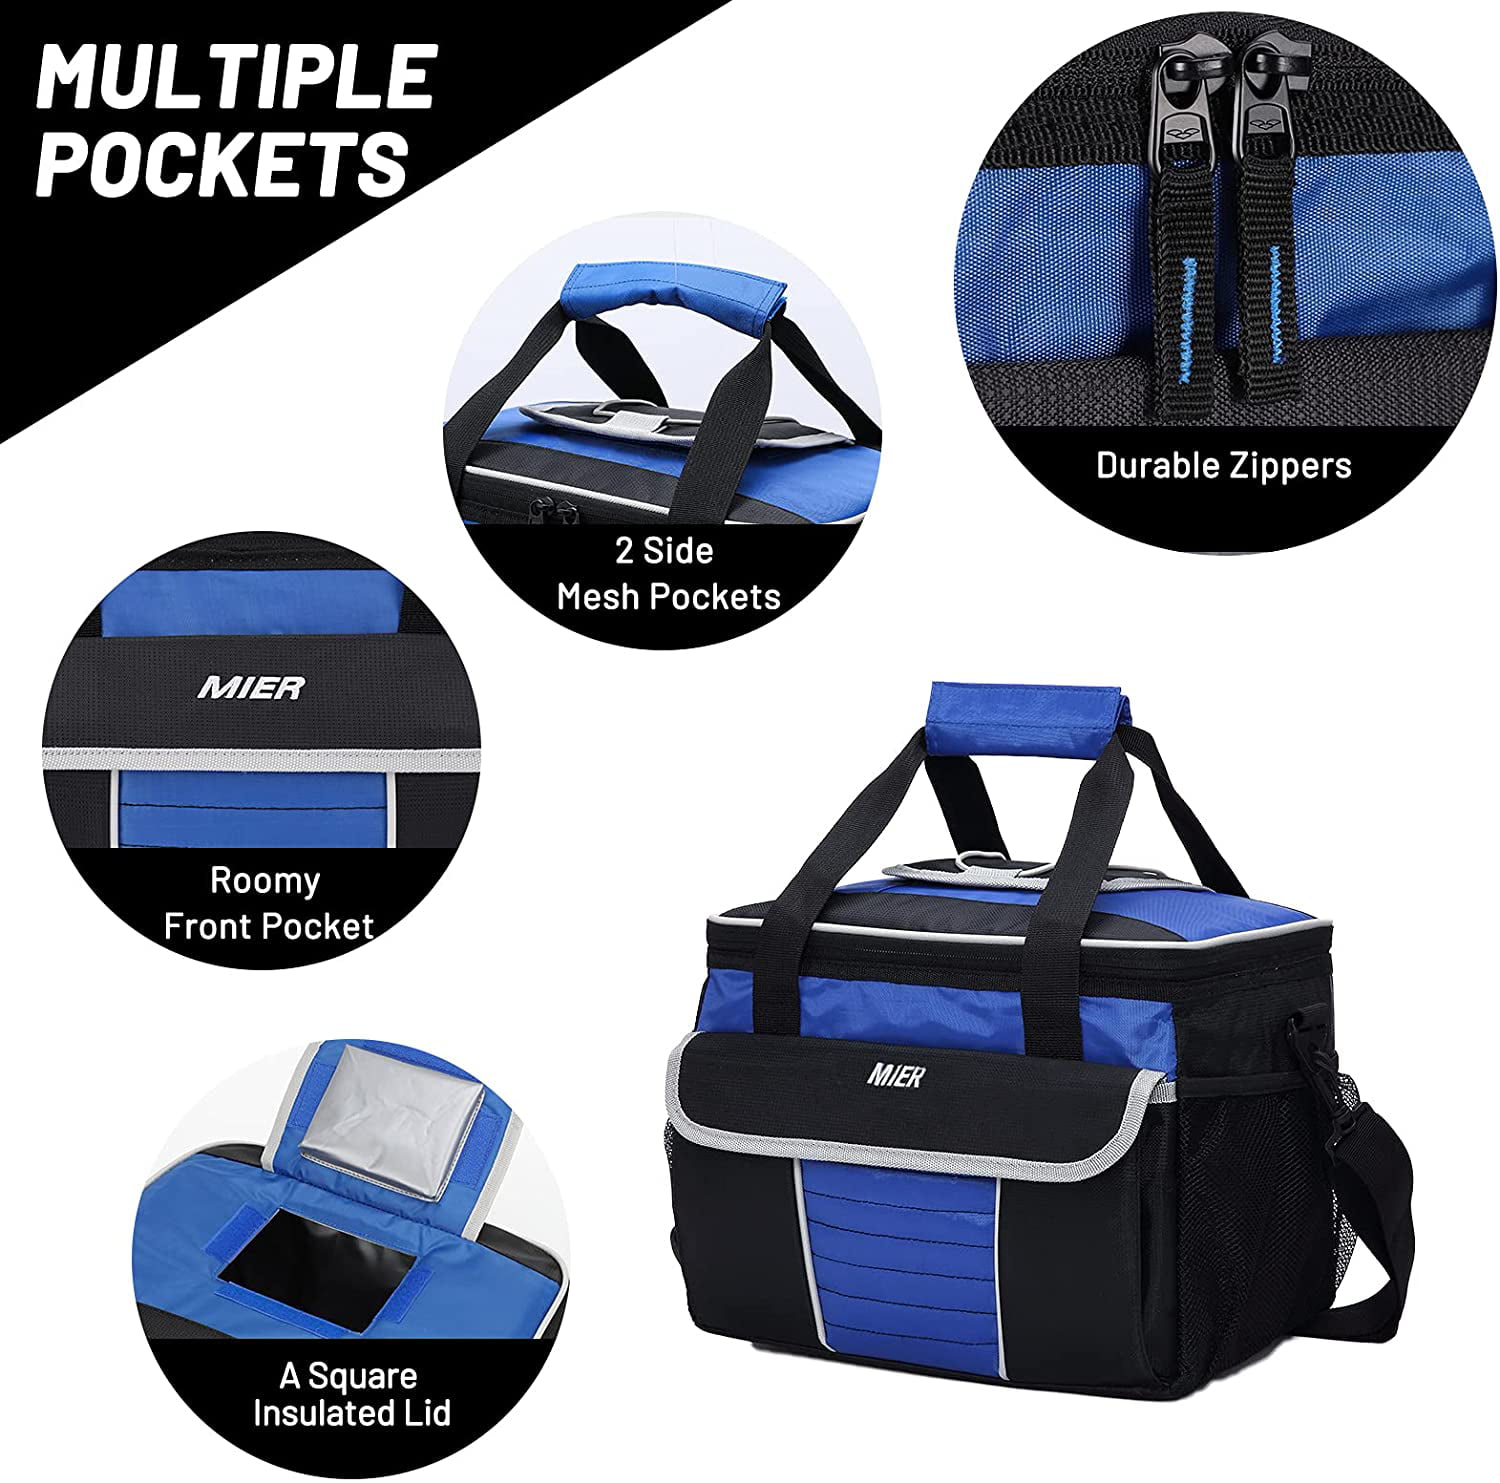 MIER Adult Lunch Box Insulated Lunch Bag Large Cooler Tote, Bluesteel / Medium